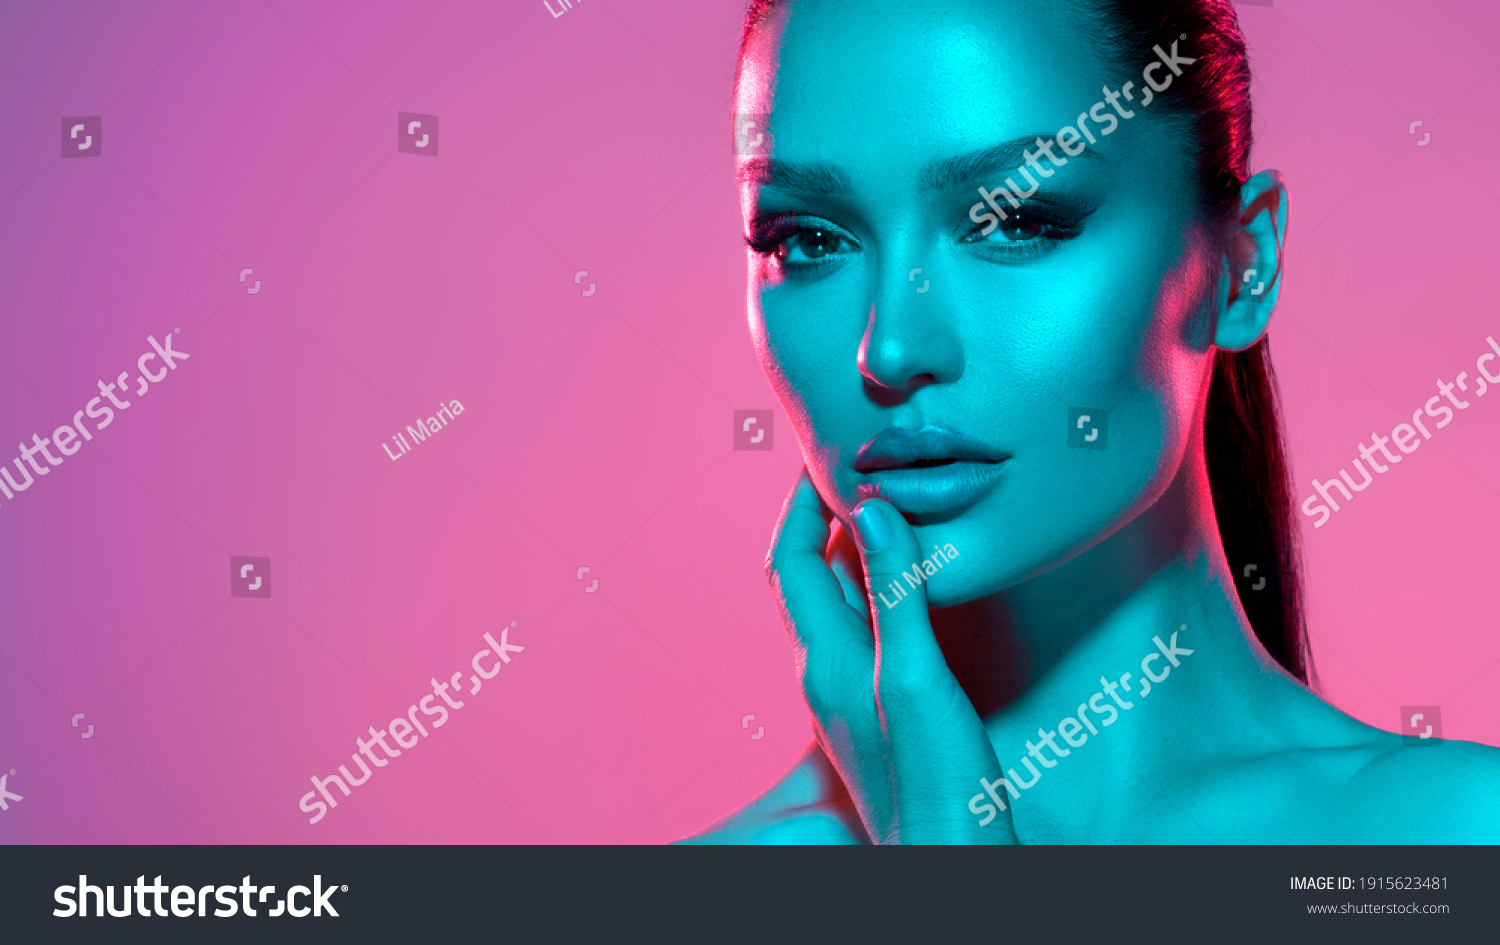 High fashion model metal silver lips and face woman in colorful bright neon UV blue and purple lights, posing in studio, beautiful girl, glowing makeup, colorful makeup. Glitter Bright Neon Makeup #1915623481